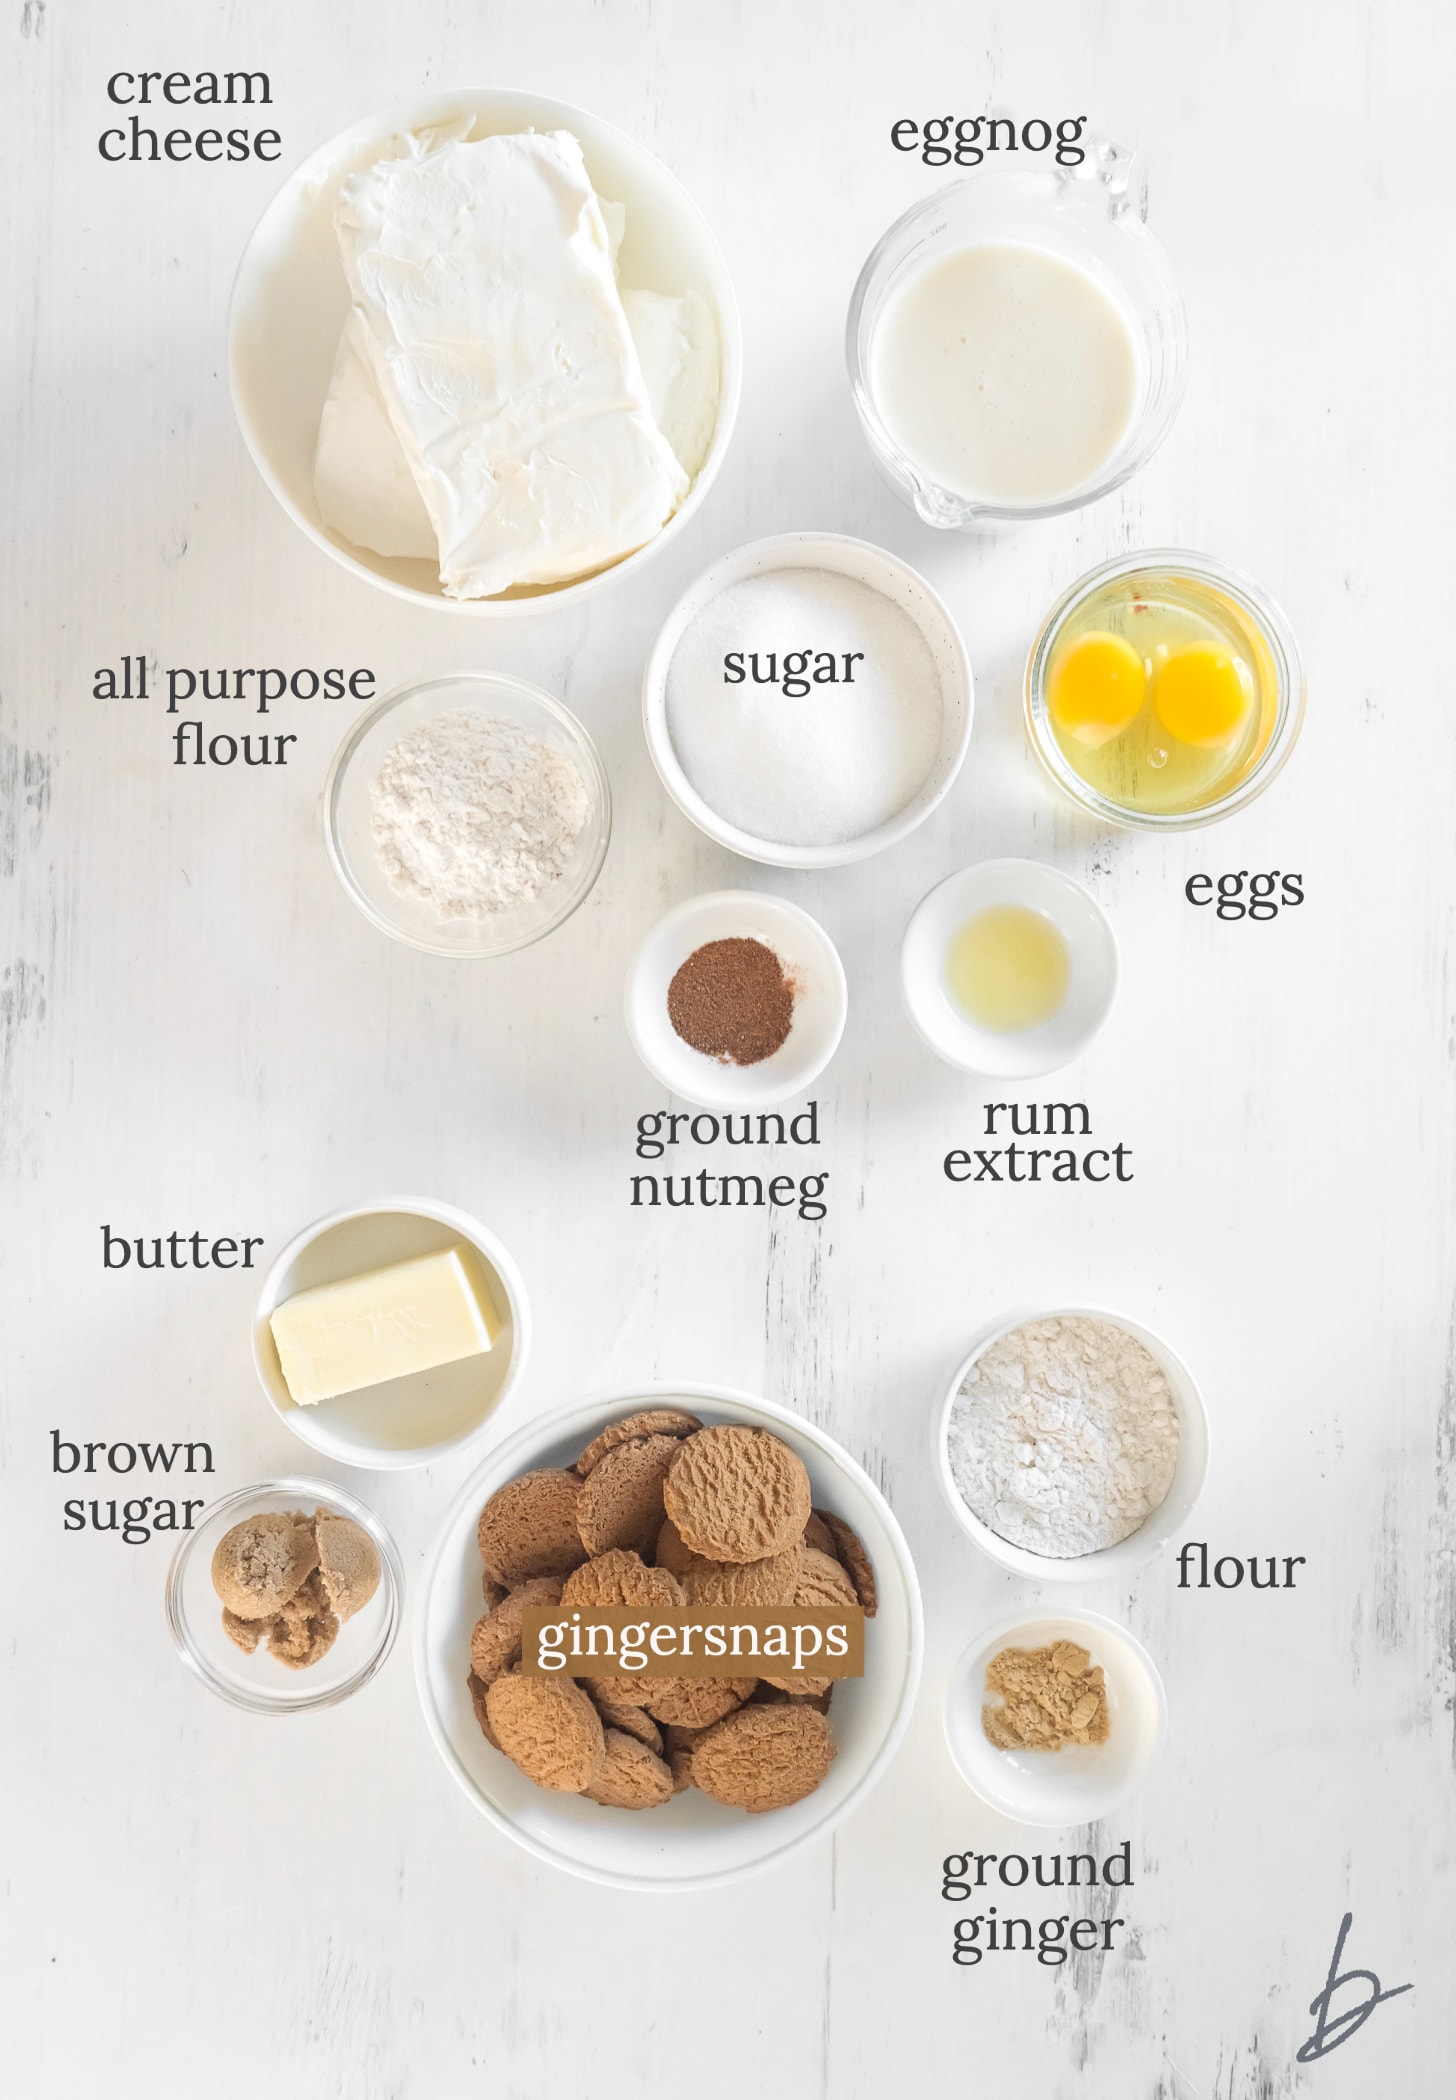 eggnog cheesecake ingredients in bowls labeled with text.